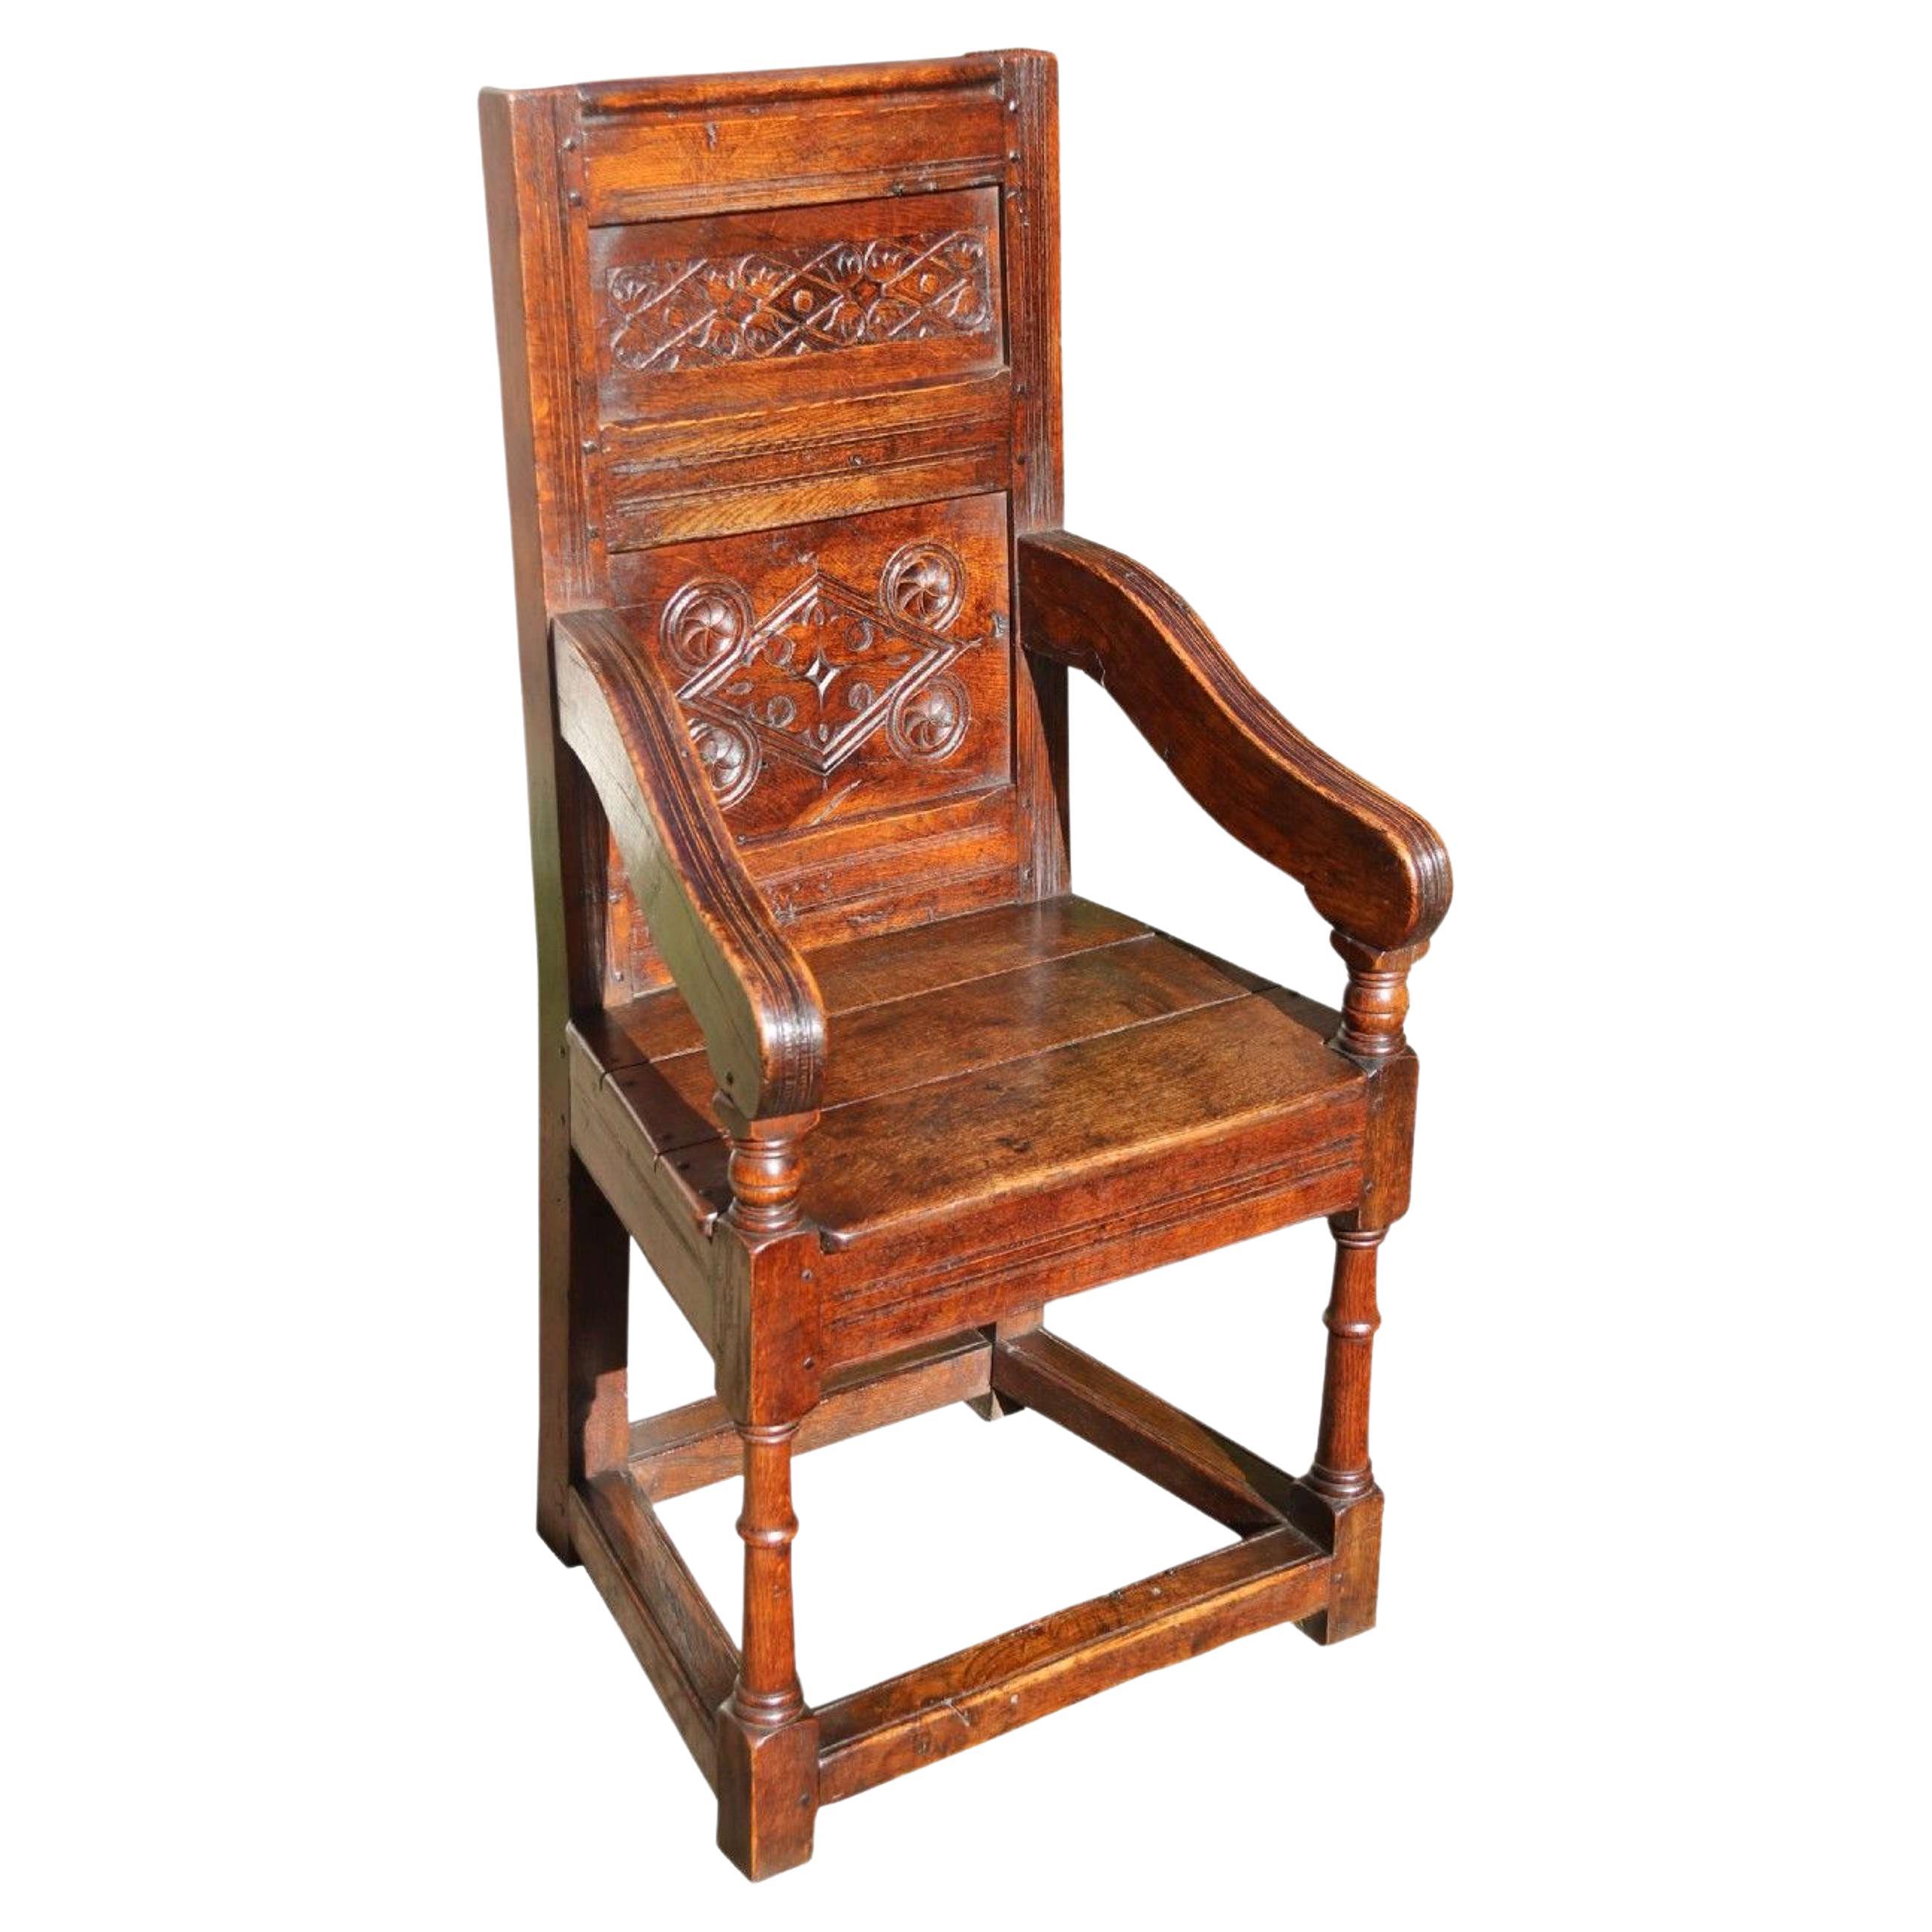 English Wainscot armchair, moulded and oak panelled circa 1860